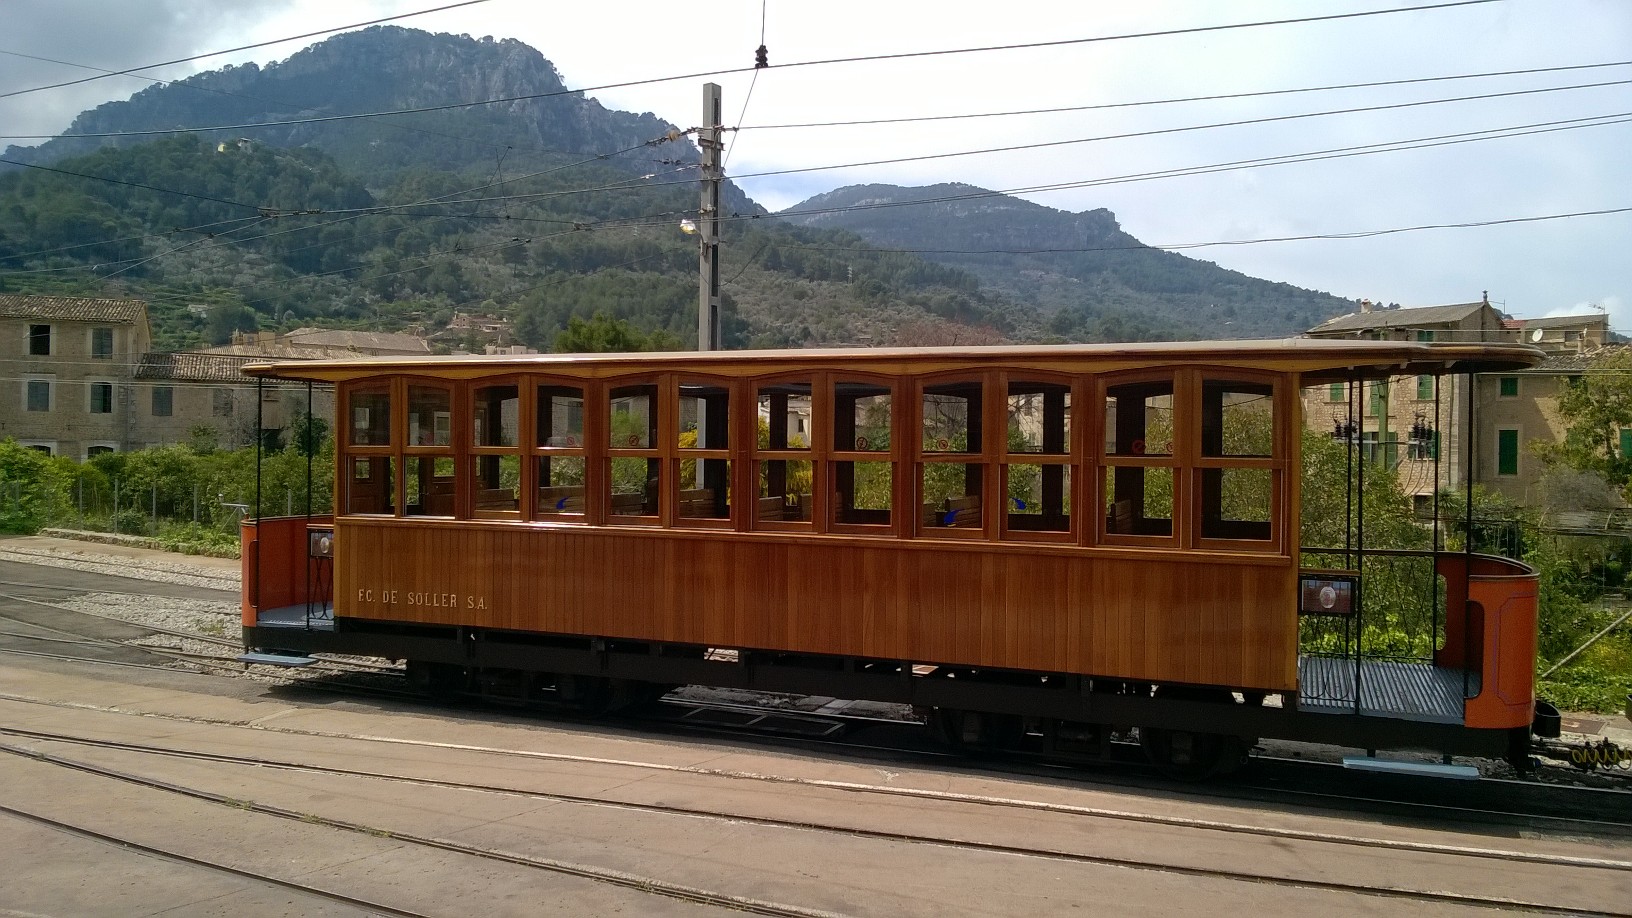 Tram from Sollet to Puerto Soller, Mallorca 